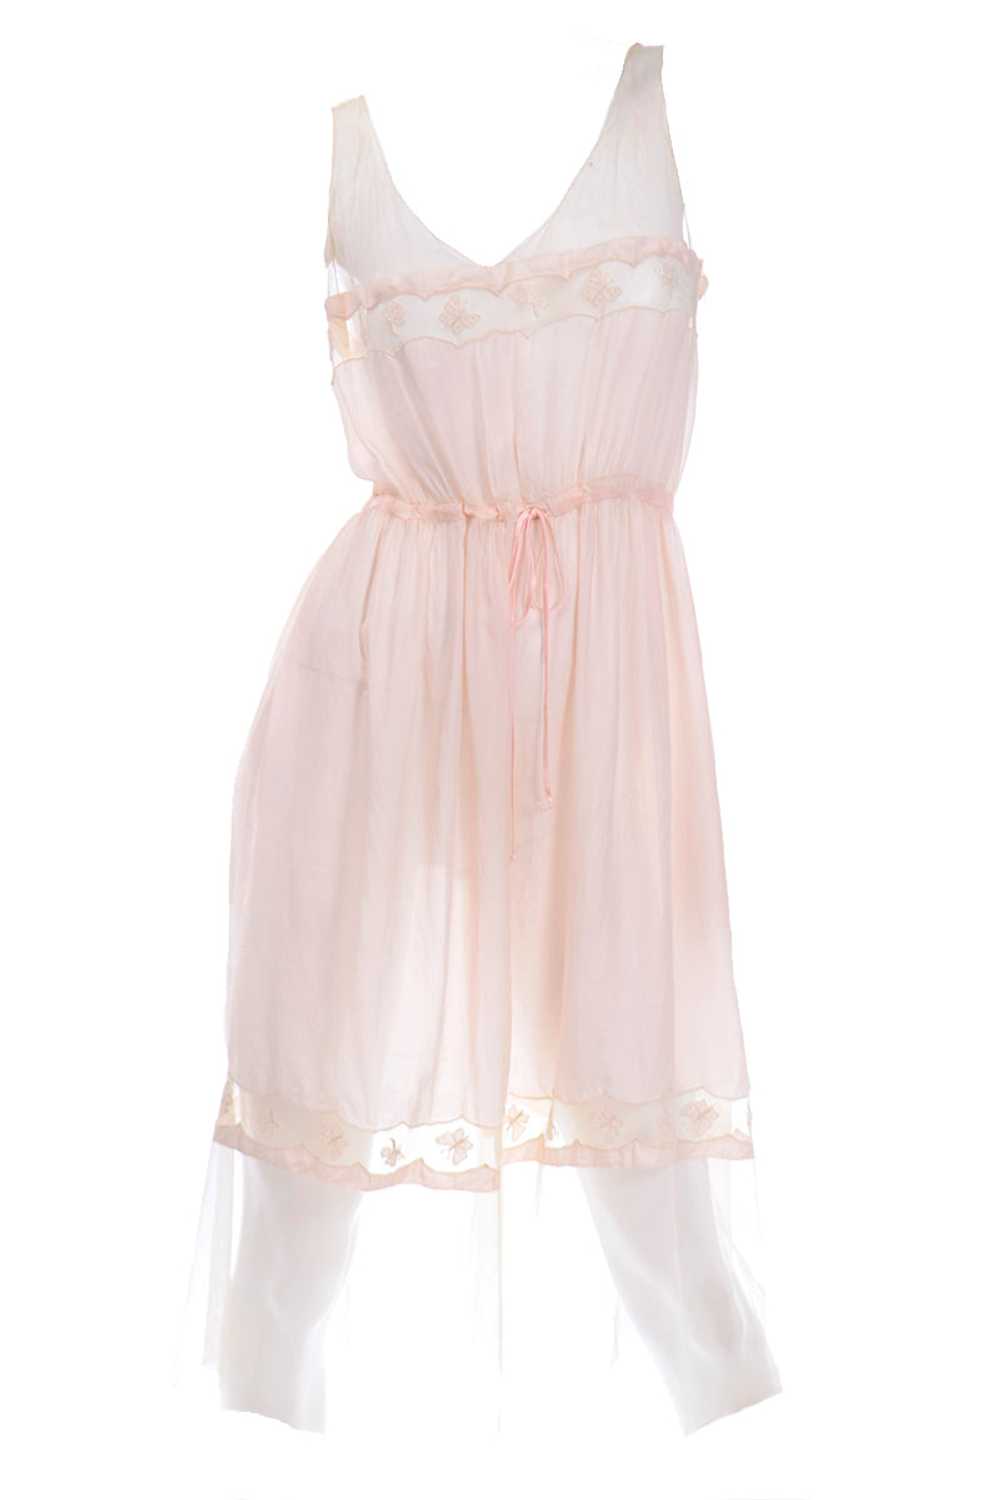 1920s Pale Pink Silk & Butterfly Lace Sleeveless … - image 1